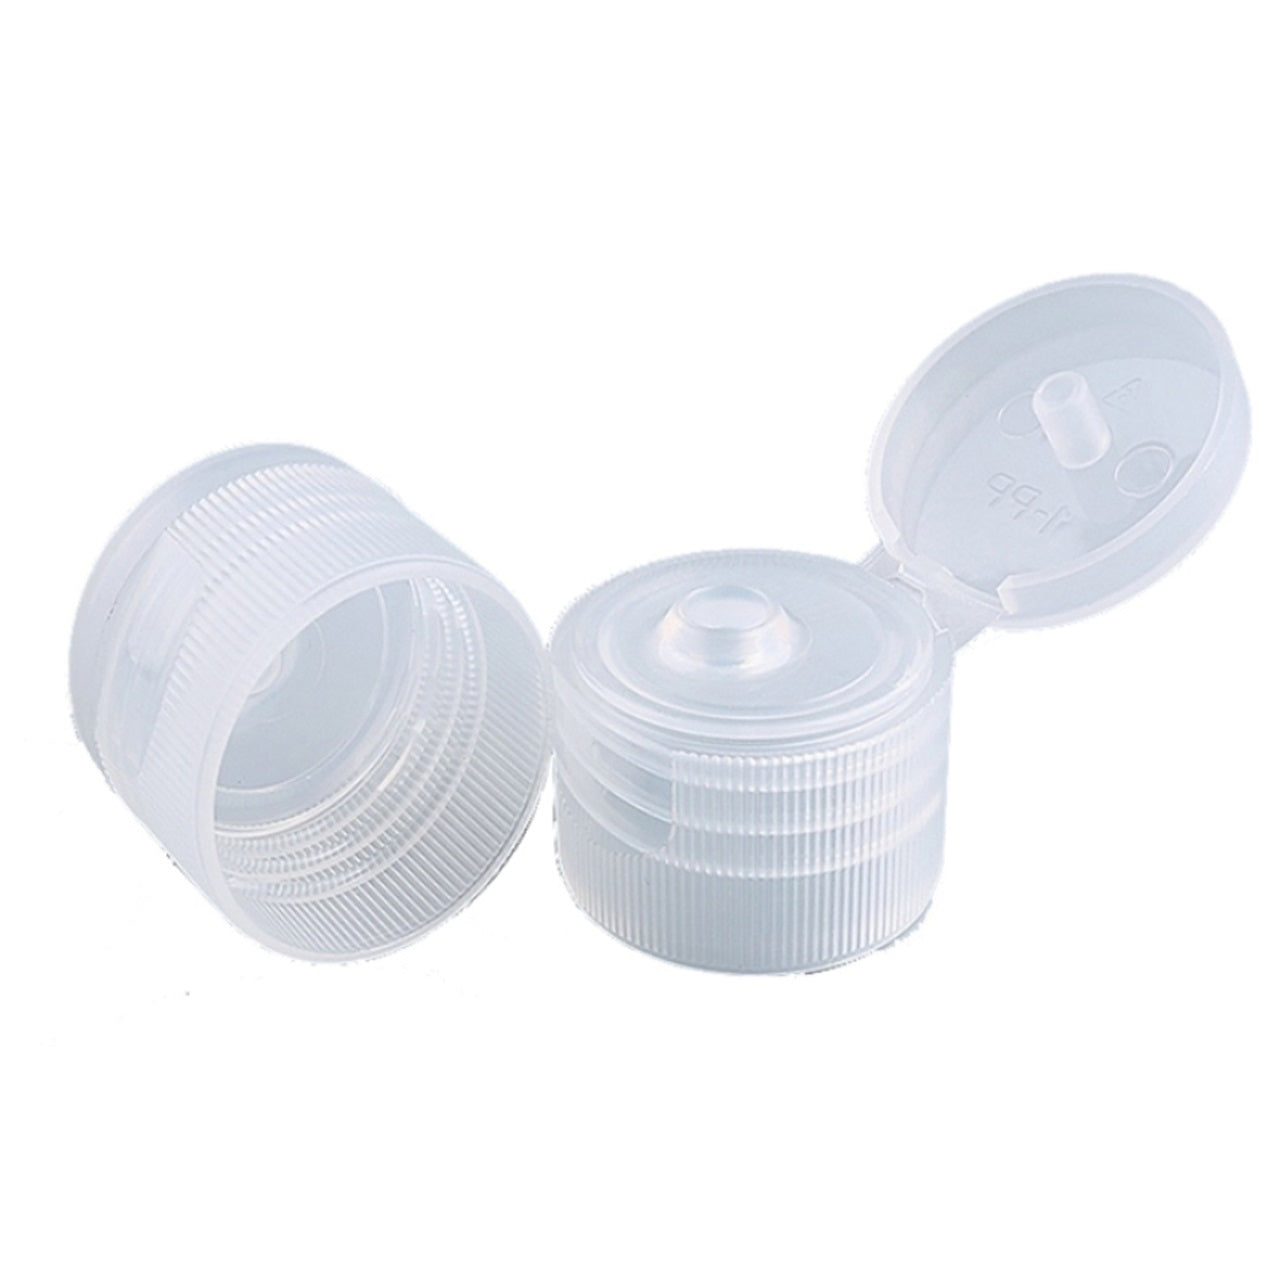 Natural 24mm Open Flip Top Cap On A White Background | Brightpack Closures And Accessories